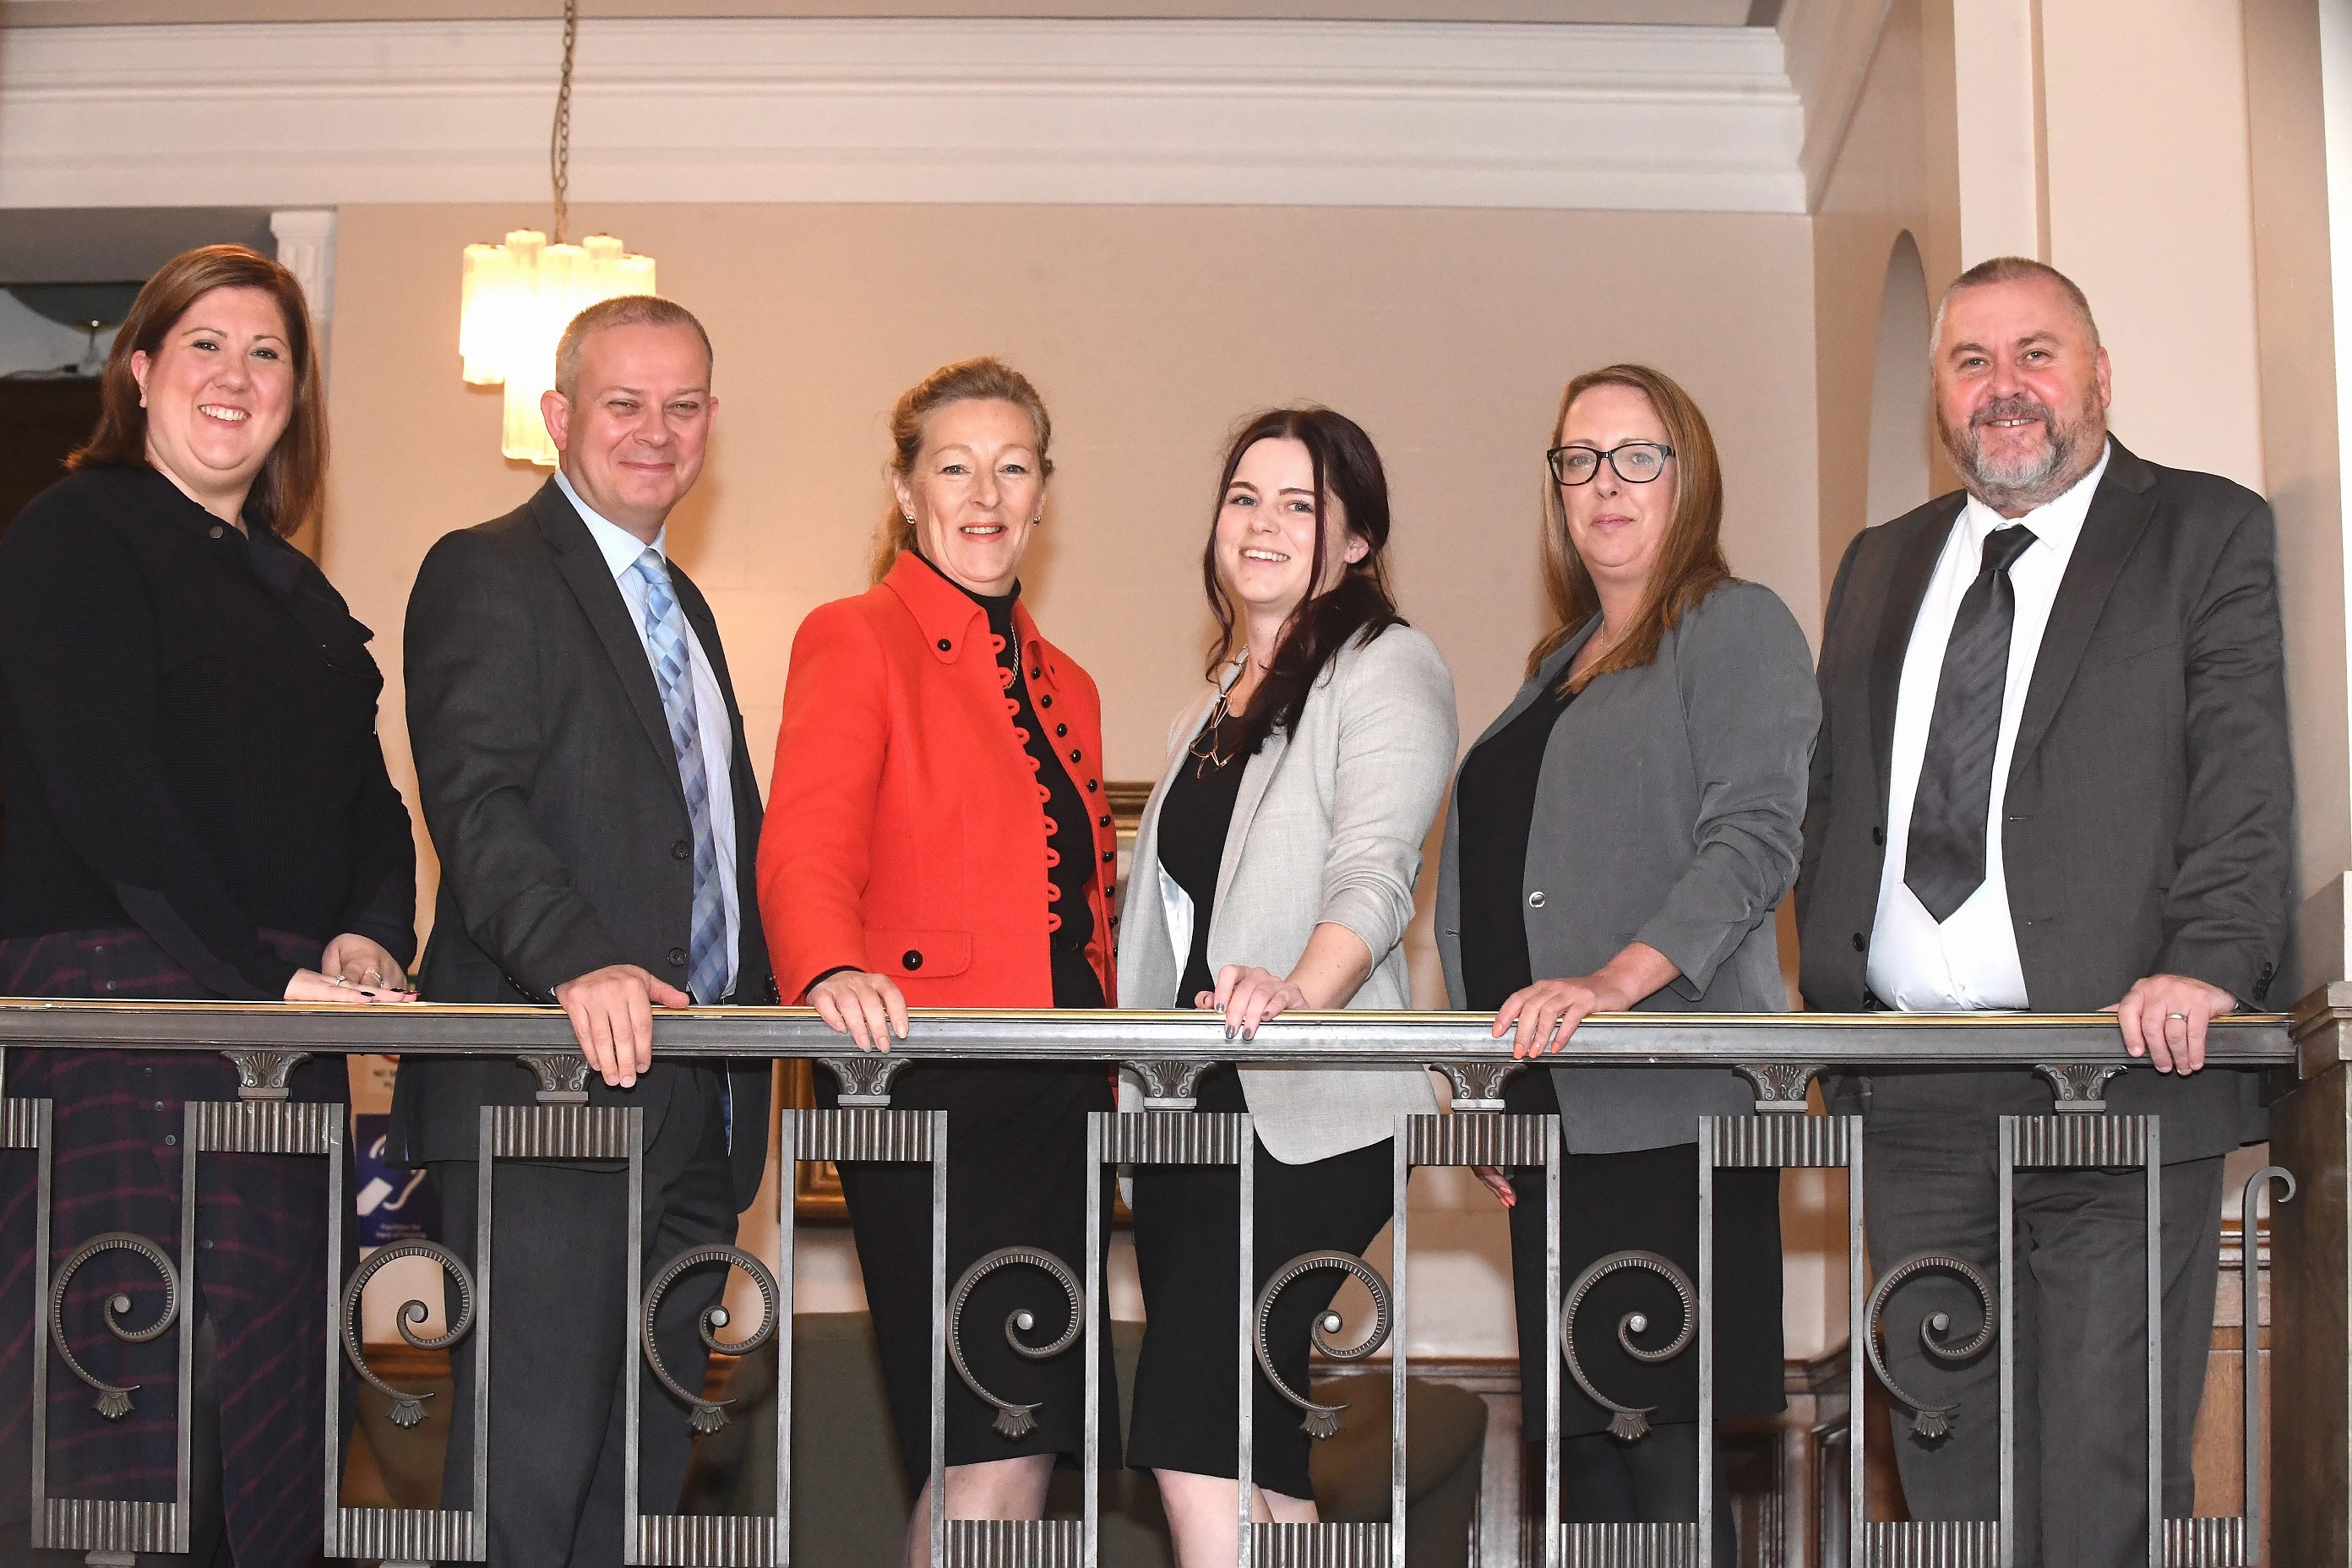 Caption: From the left, Gemma Gathercole, Matt Alvarez, Steph Parker, Emma Culey, Emma Carty and Dave Lennox from the Careers Hubs in Coventry and Warwickshire